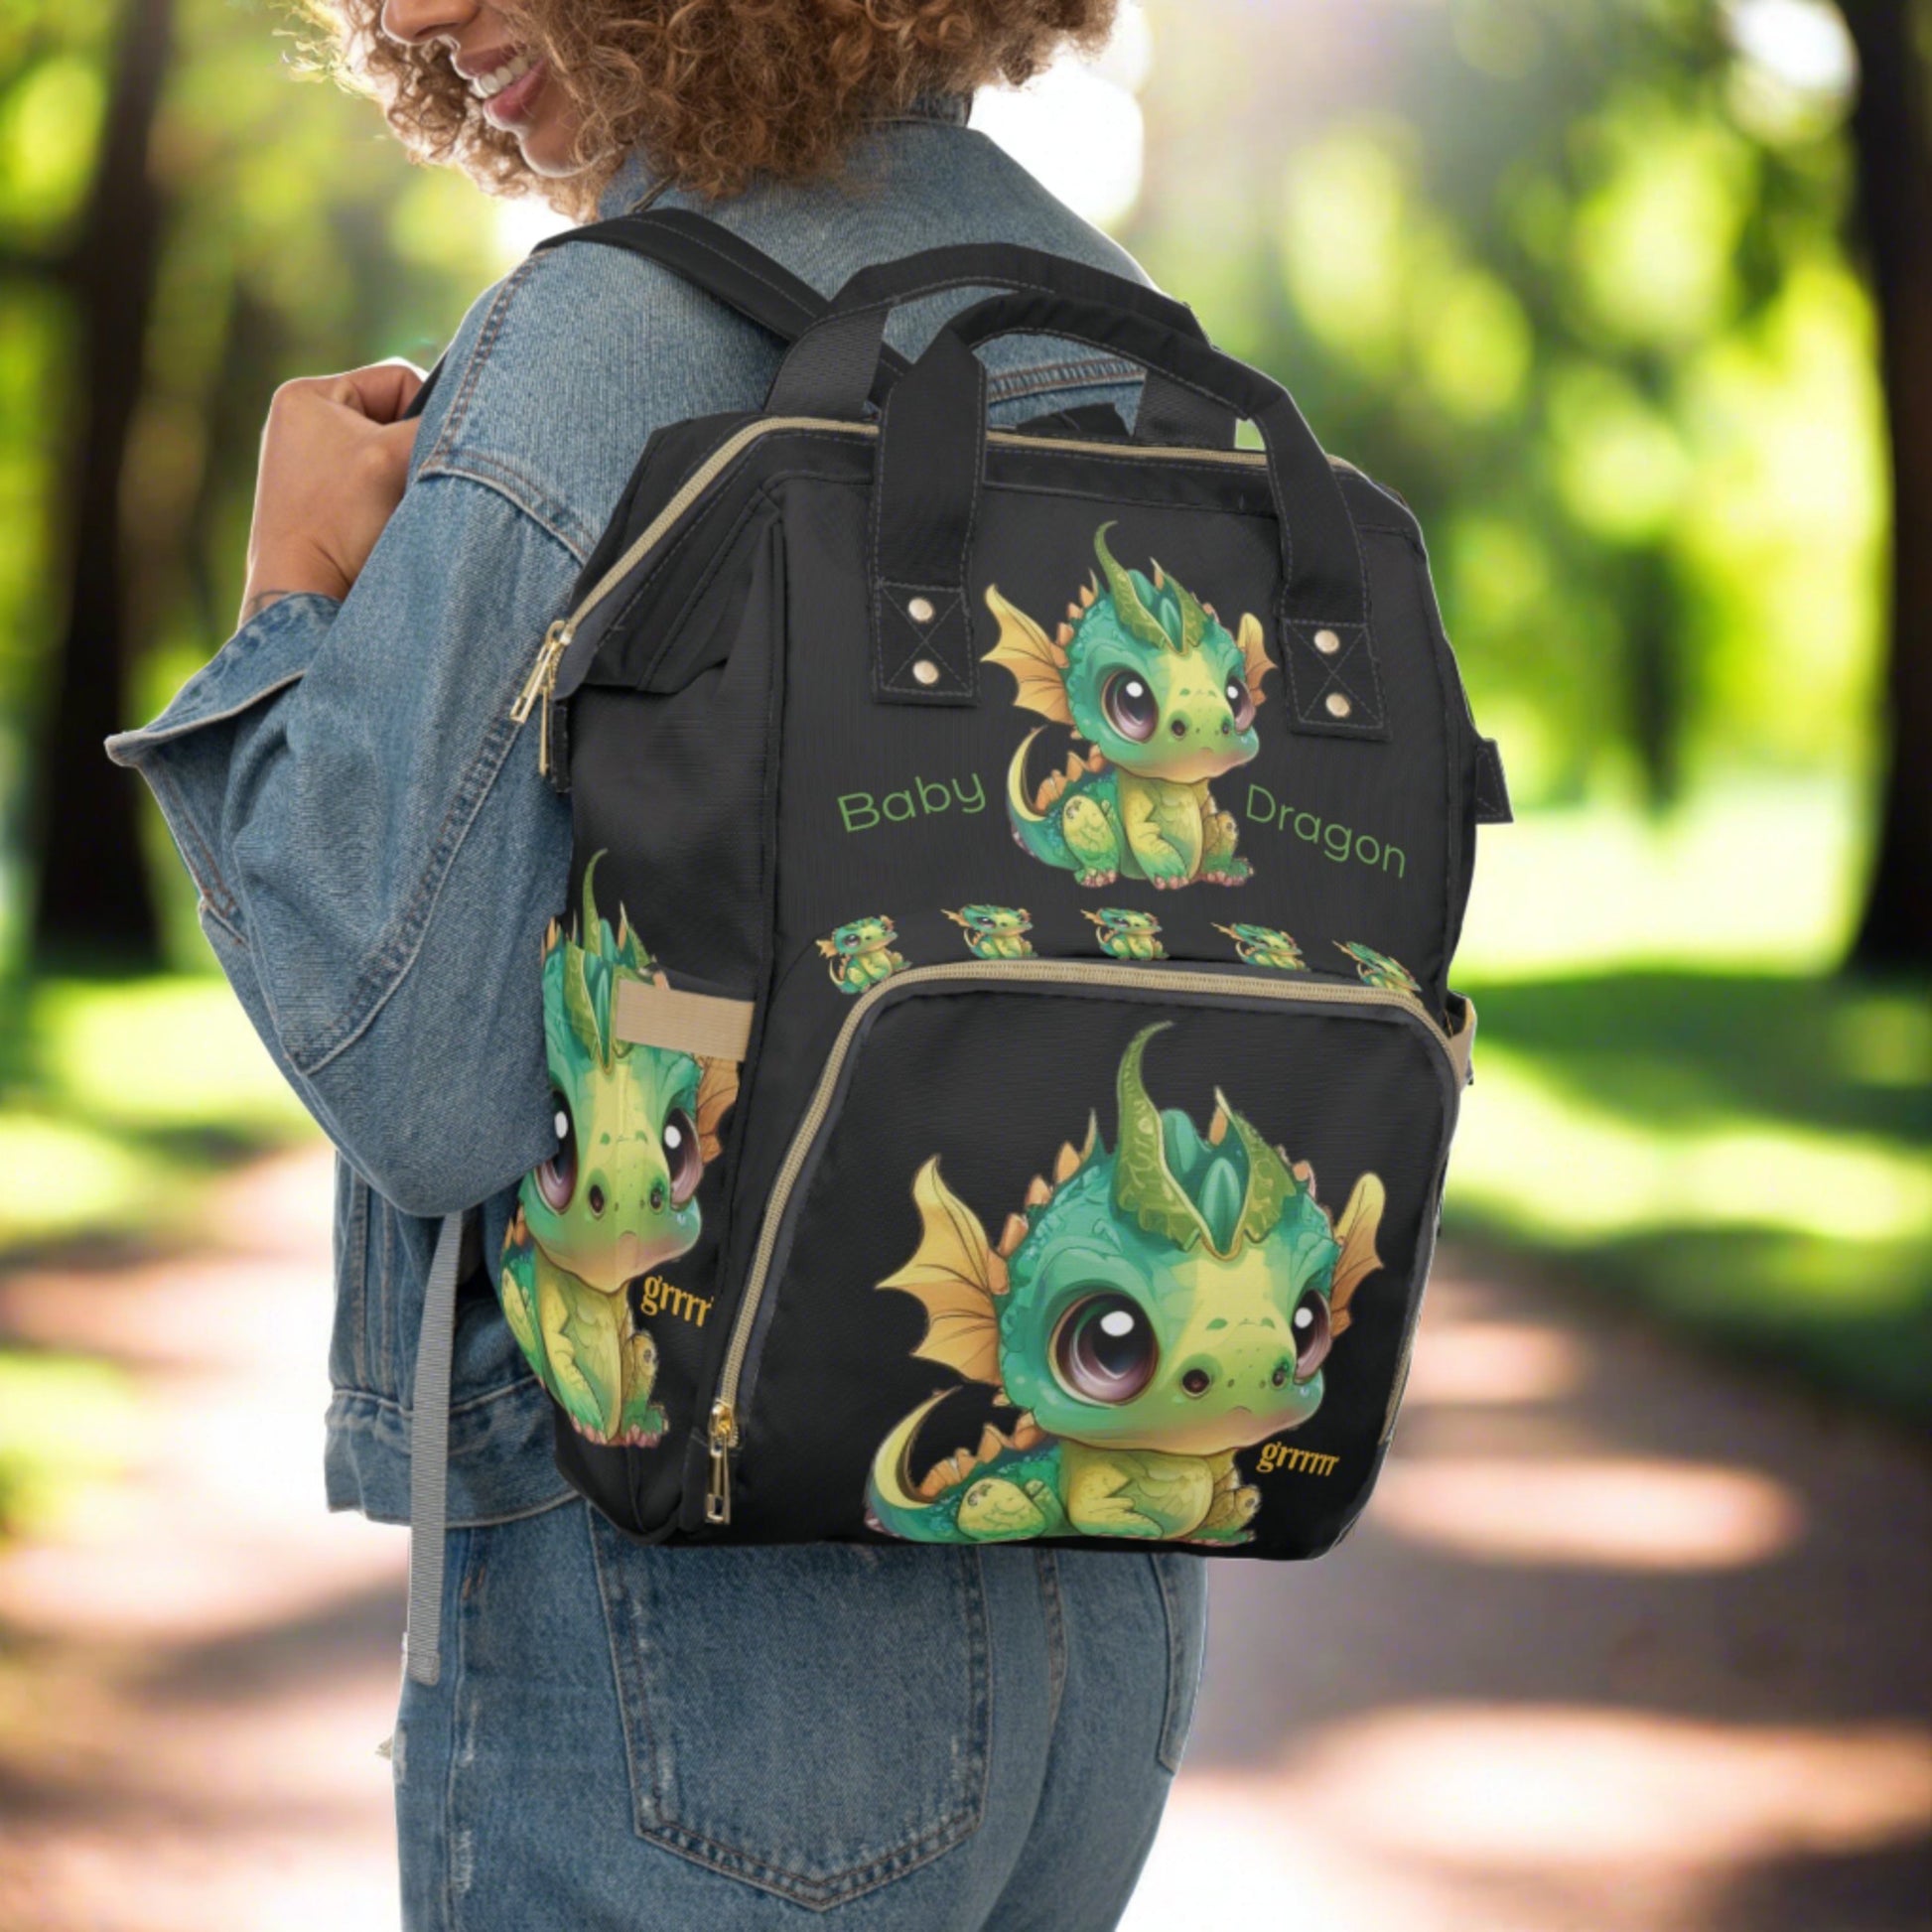 A black backpack/diaper bag with top handles too - a front zipped pocket with a baby Bobby dragon grrr on it - baby Bobby Dragon is on the top - front- back & sides - text Baby Dragon on the front - inside pockets & sturdy zipper and well made.